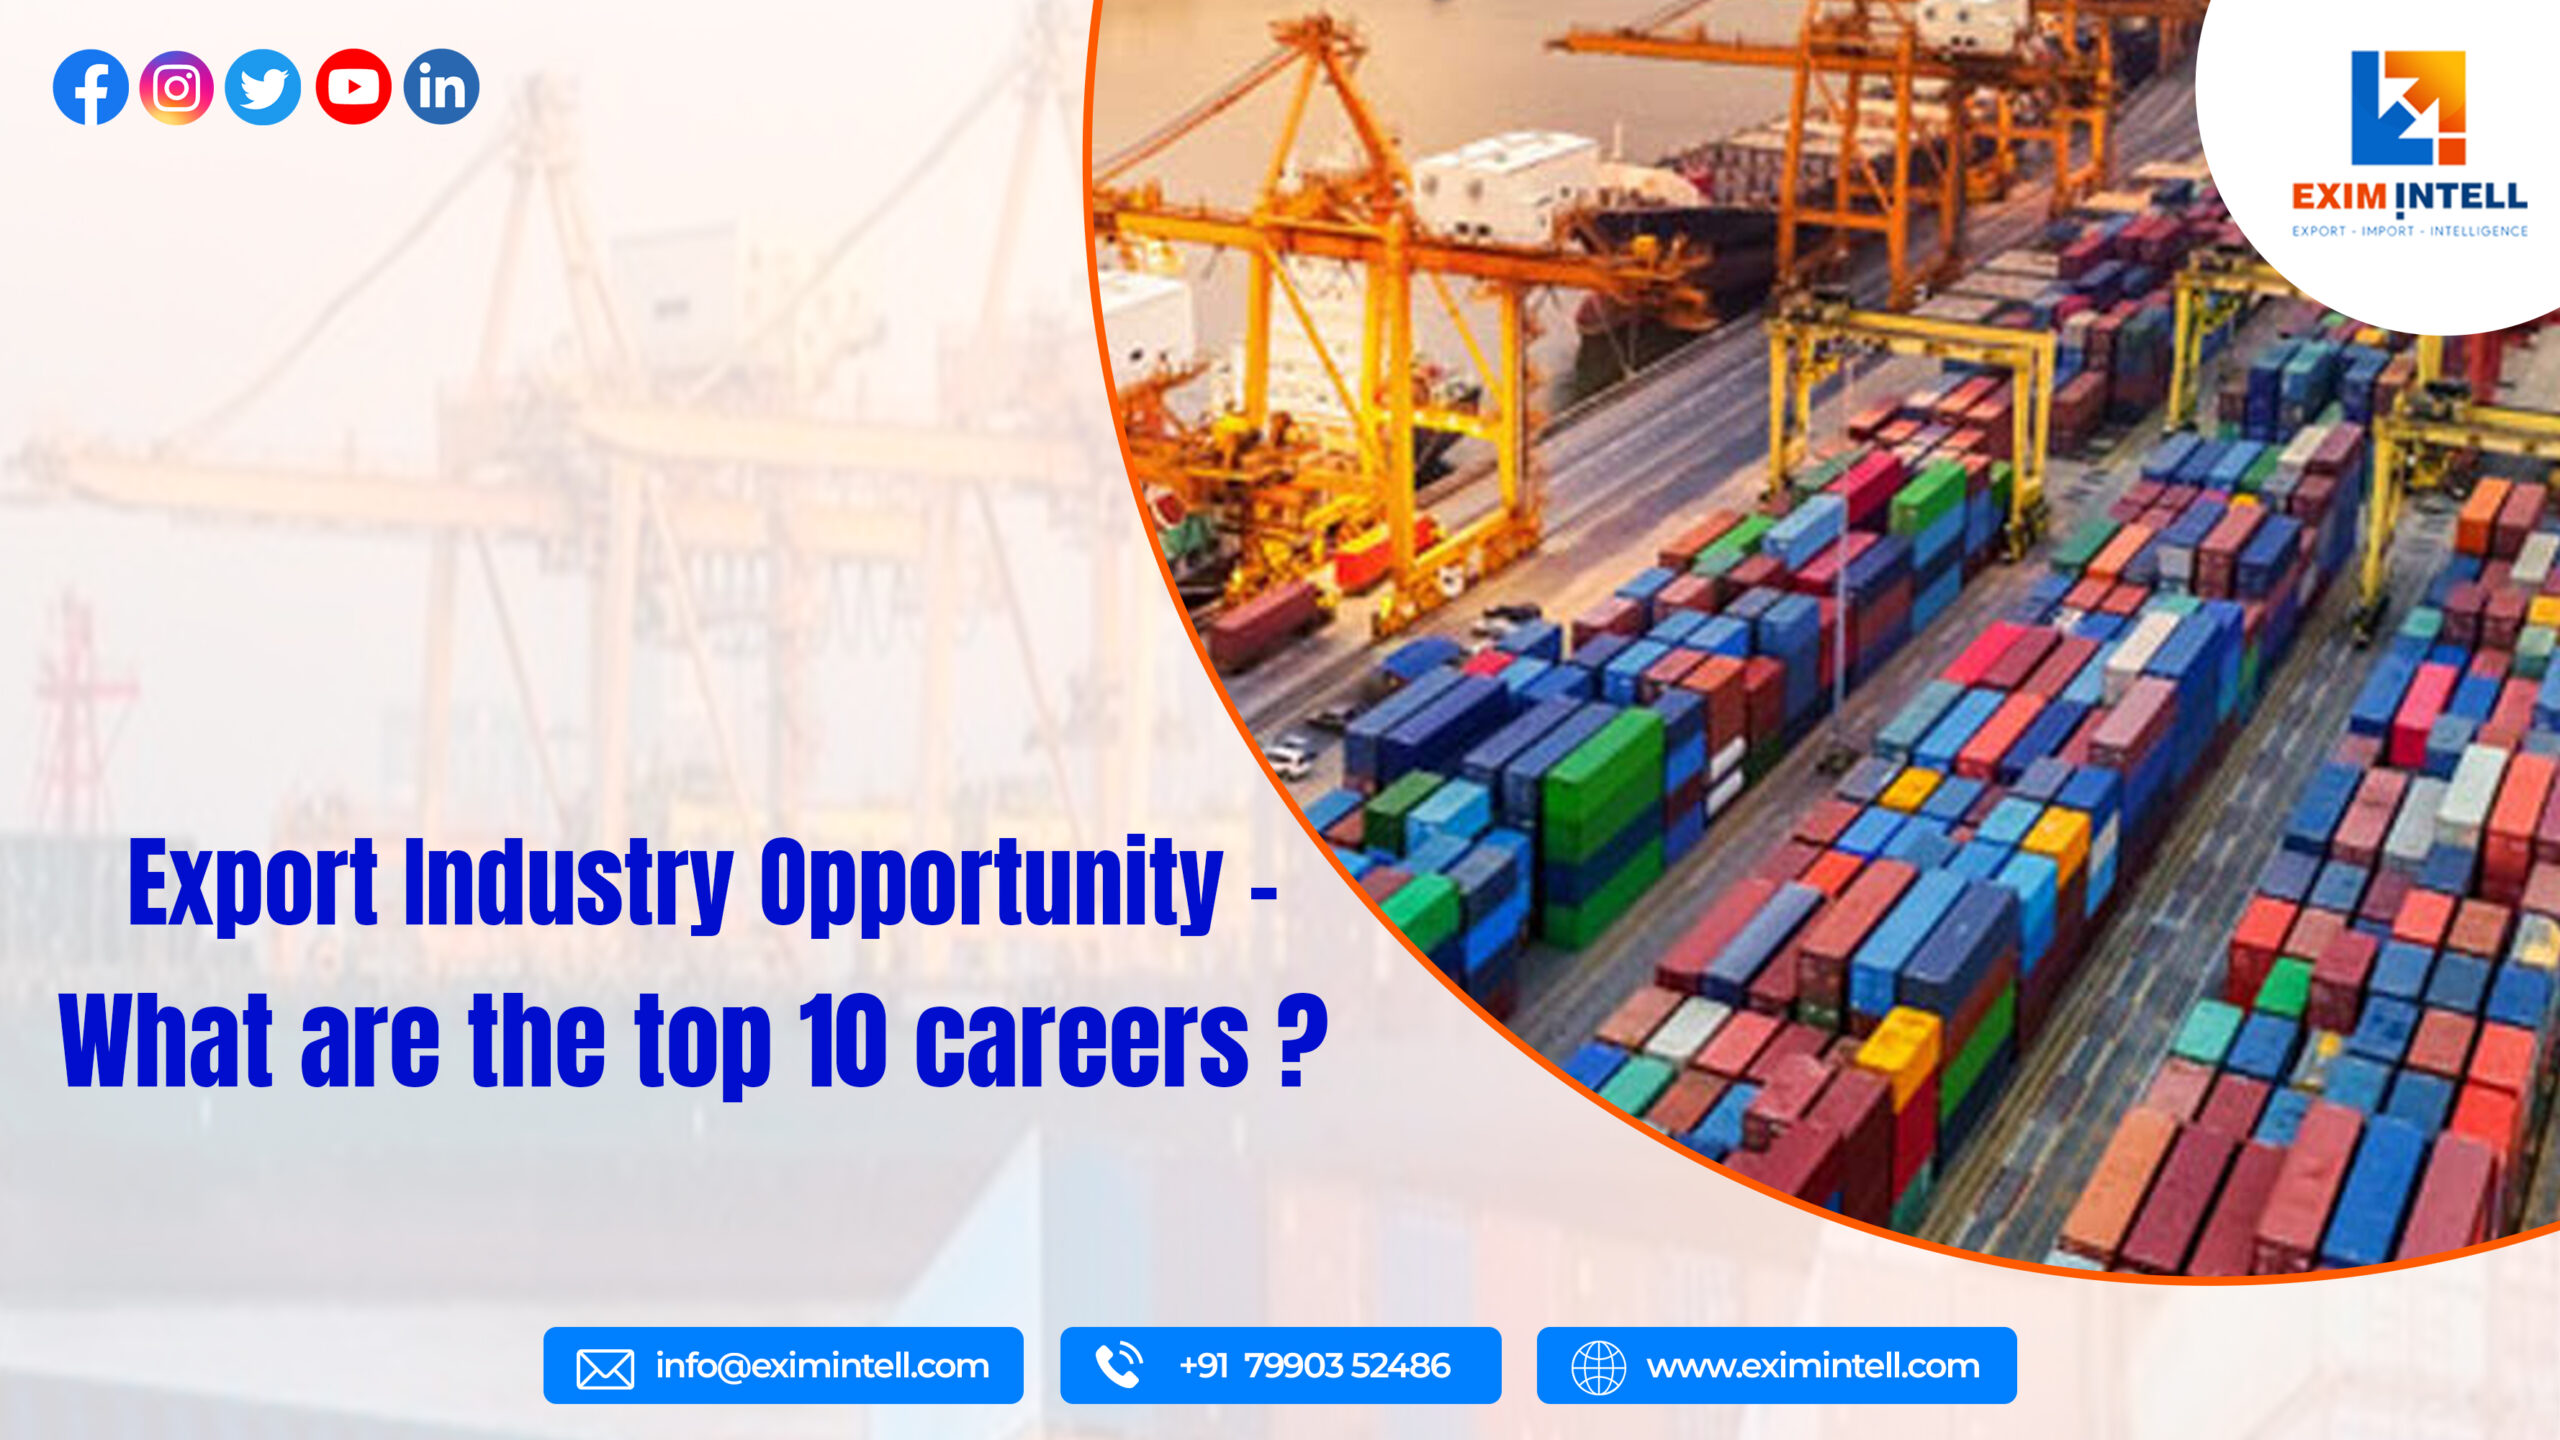 Export Industry Opportunity – What are the best 10 careers?